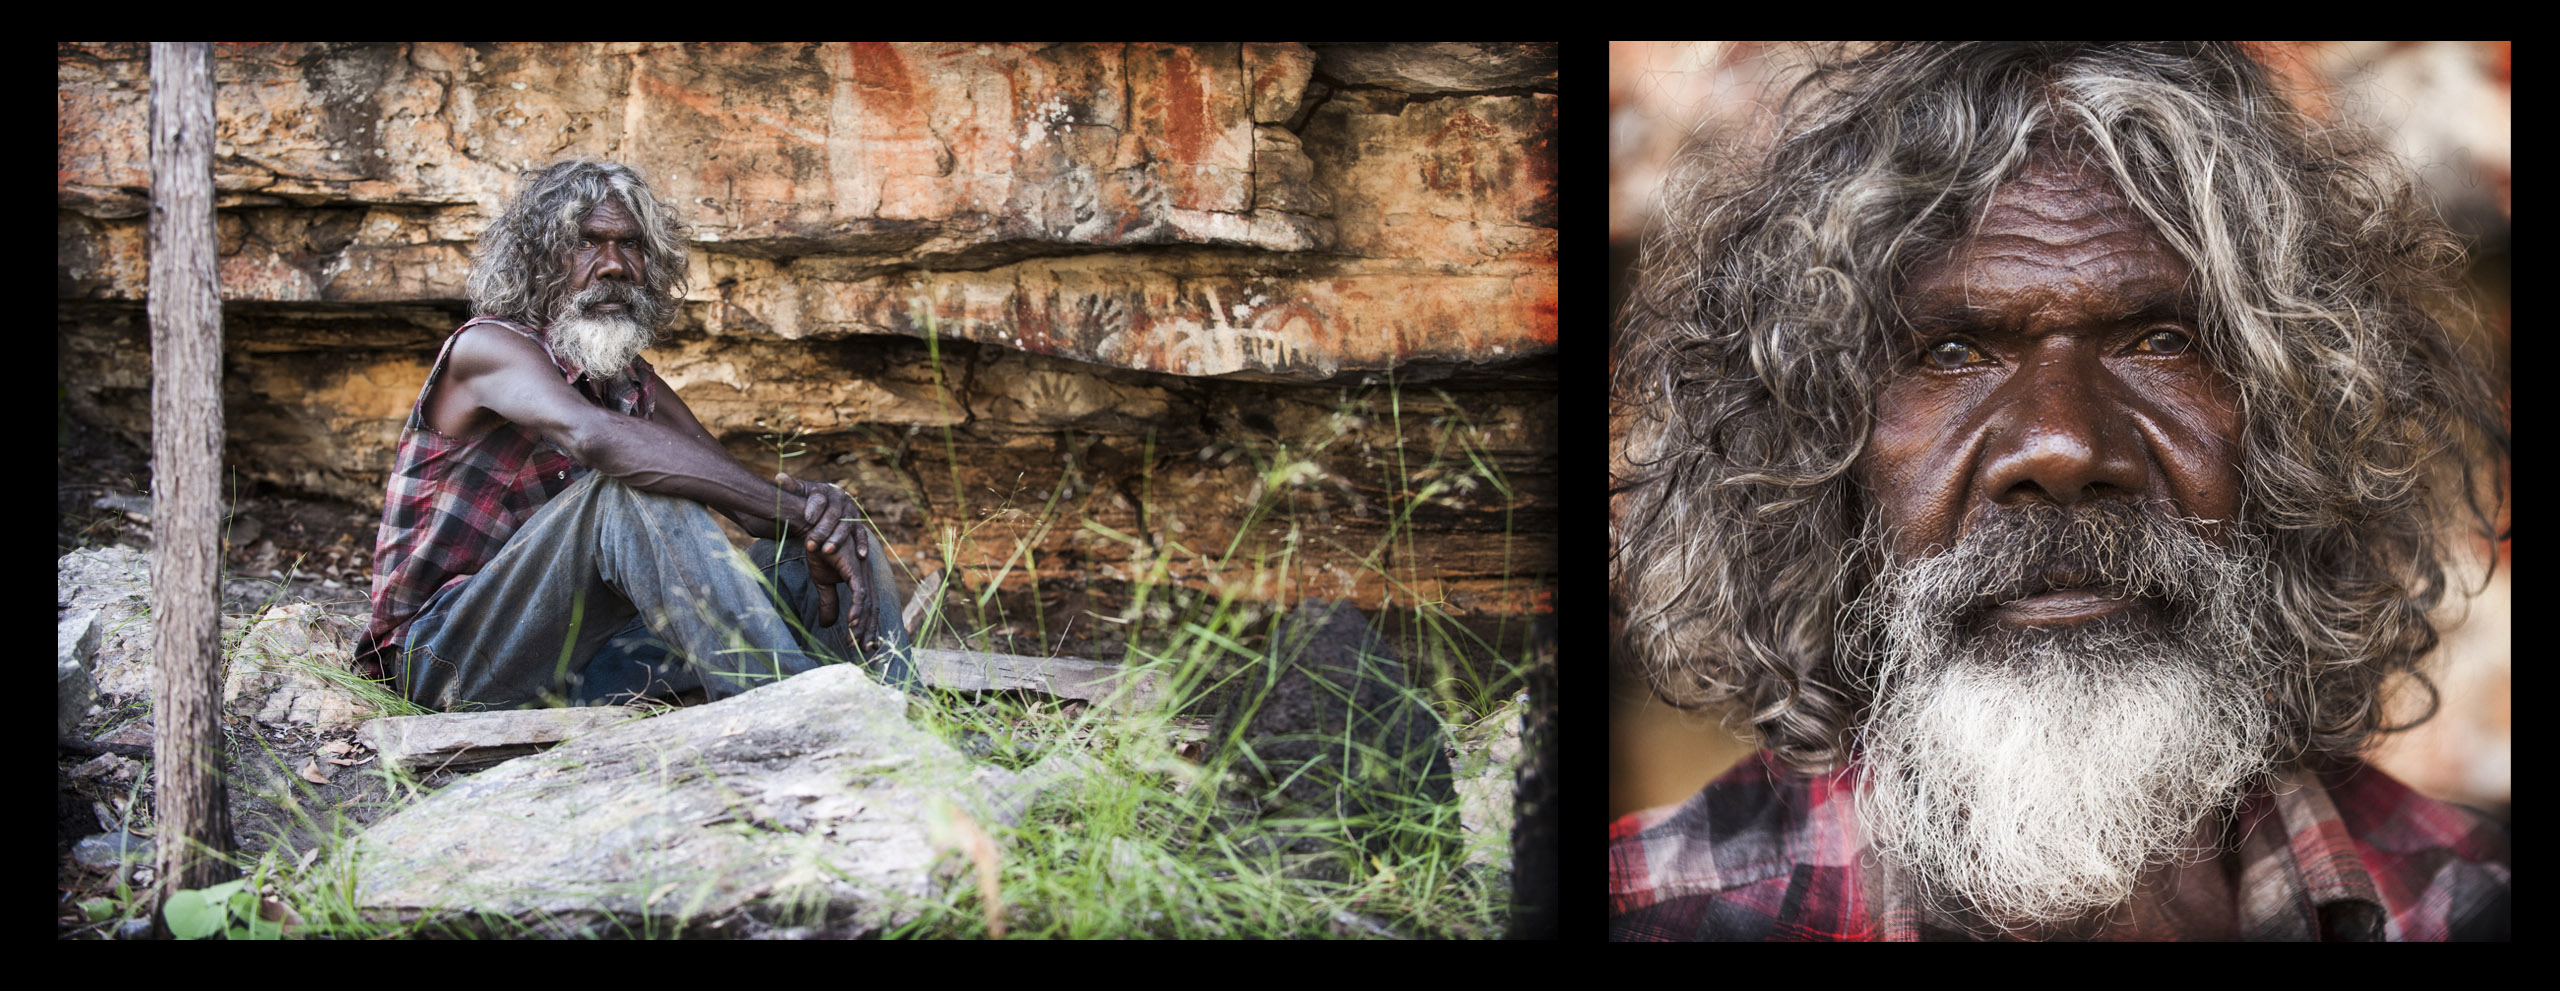 Two part production still of David Gulpilil. In the first photograph he sits on a rock looking at the camera and the second is a close-up of his face as he looks at the camera.